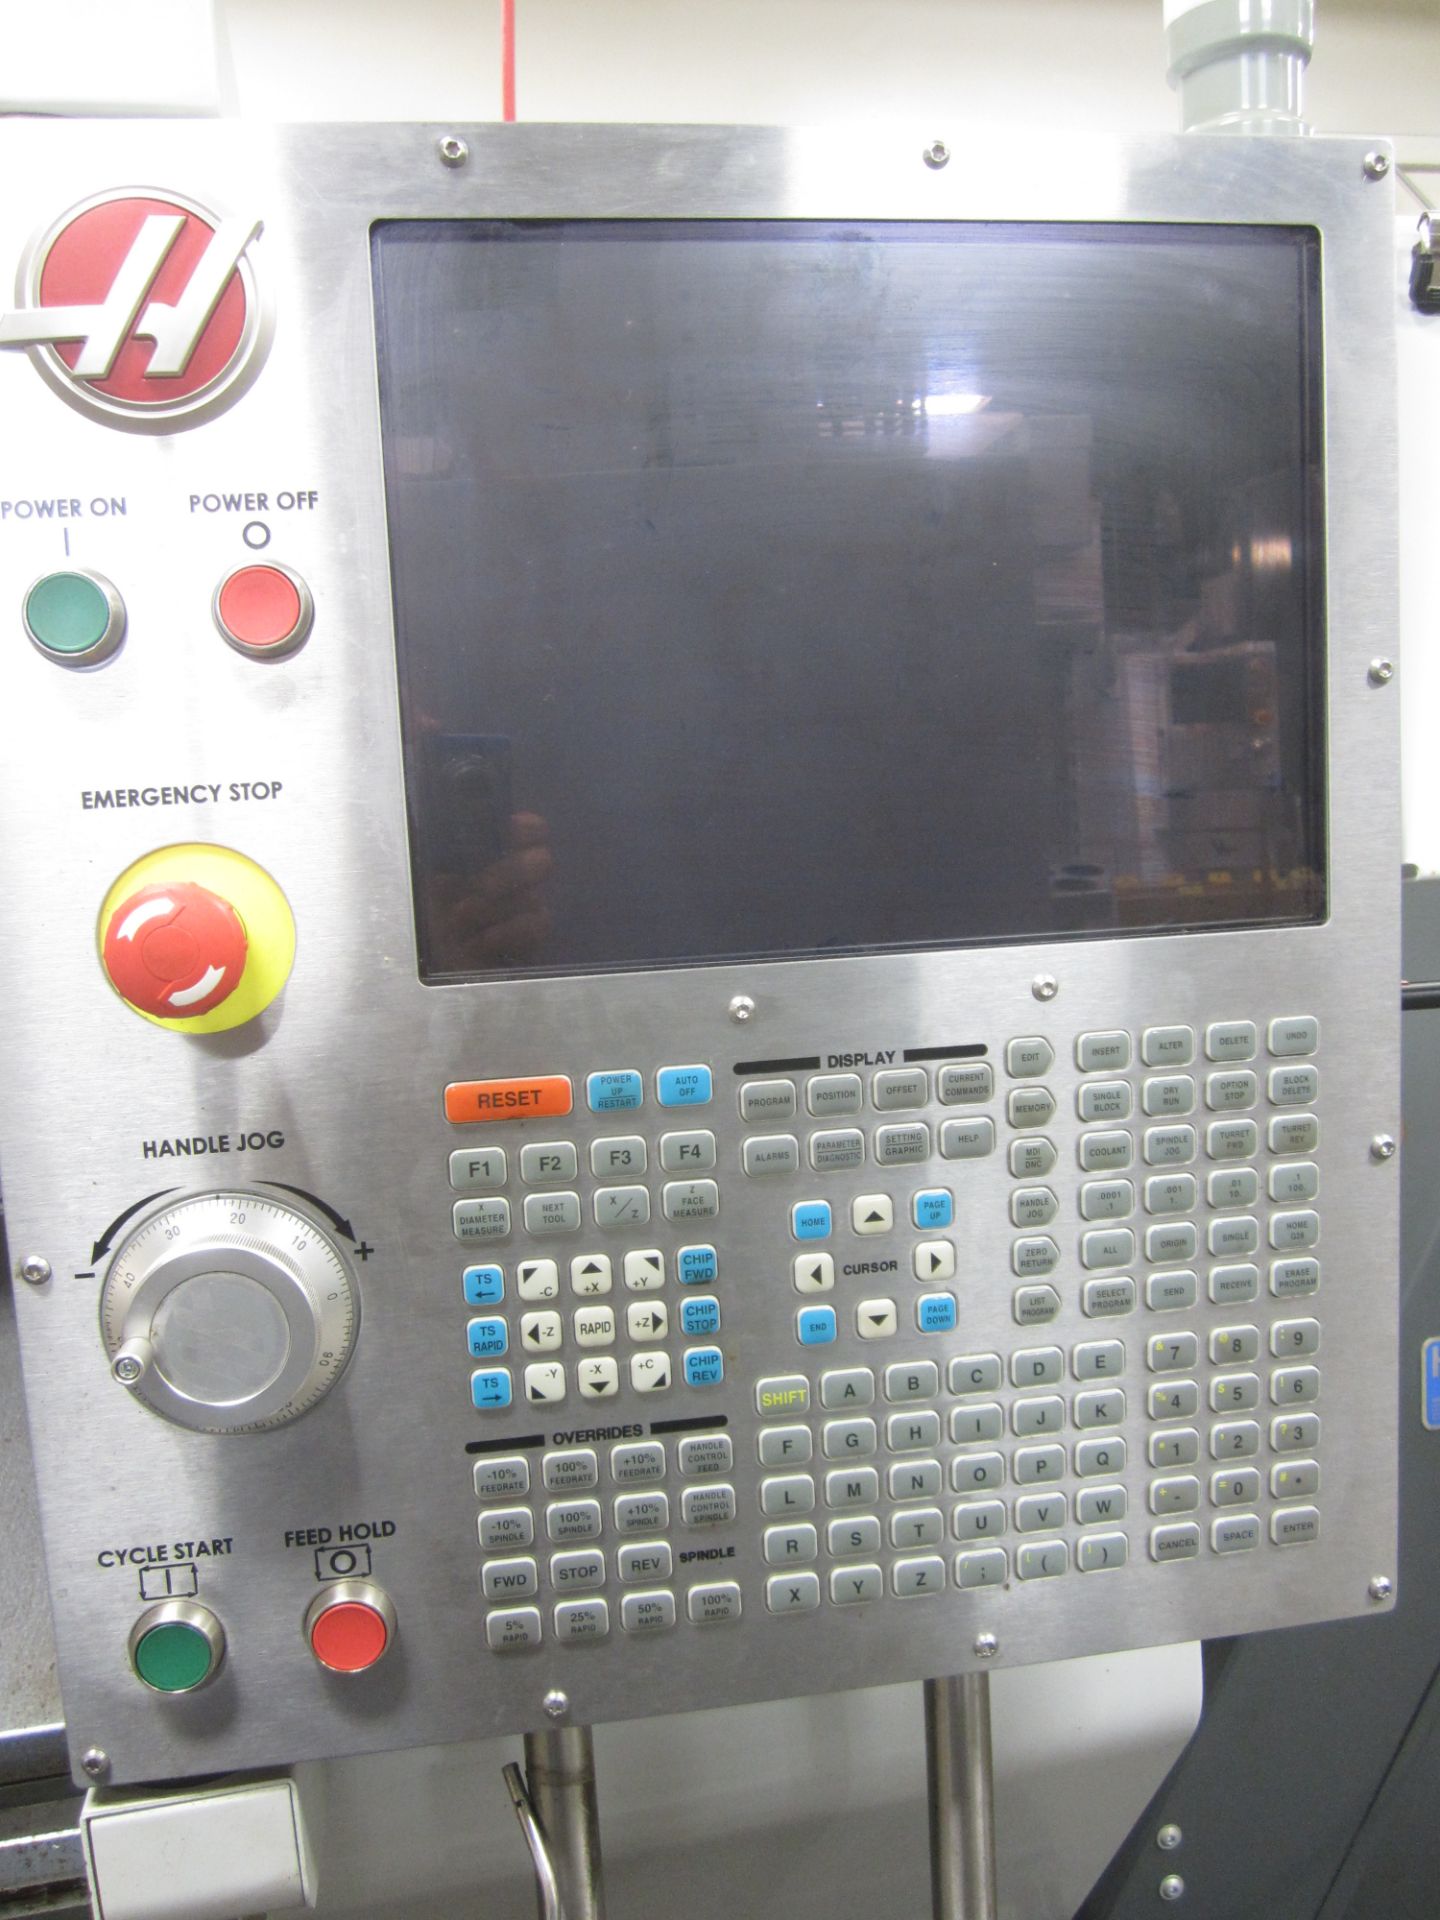 Haas ST10 CNC Turning Center, s/n 3103044, New 2015, Haas CNC Control, 1.75 In. Capacity, 15 HP, - Image 4 of 12